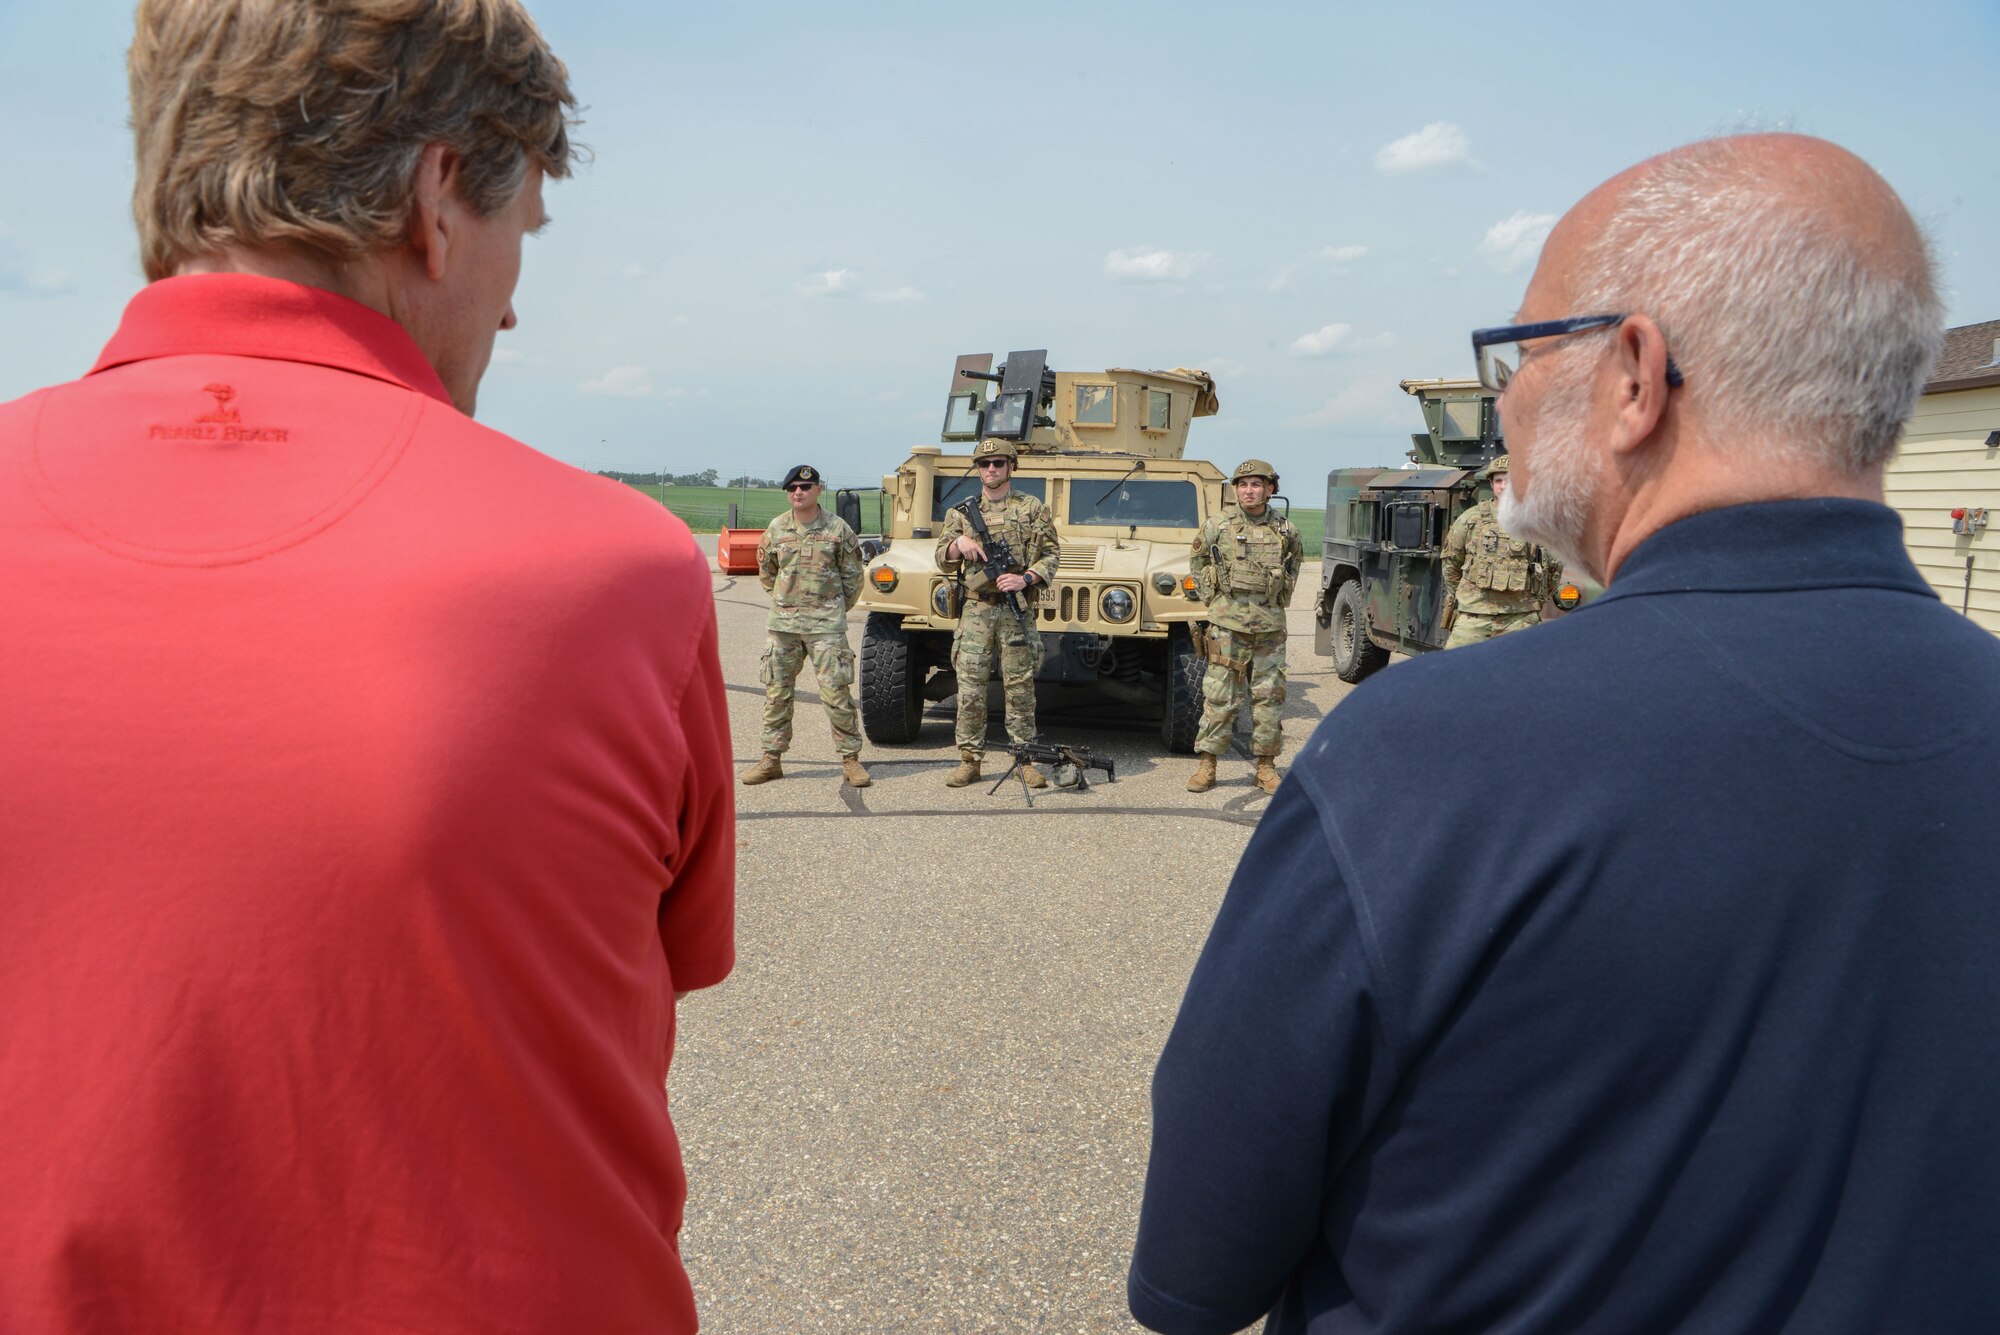 Airmen from the 91st Security Forces Group speak with Minot civic leaders of the Minot community outside of a Missile Alert Facility at Minot Air Force Base, North Dakota, July 13, 2023. The civilian leader tour was meant to build morale and camaraderie between the military and the civilian community. (U.S. Air Force photo by Airman 1st Class Trust Tate)